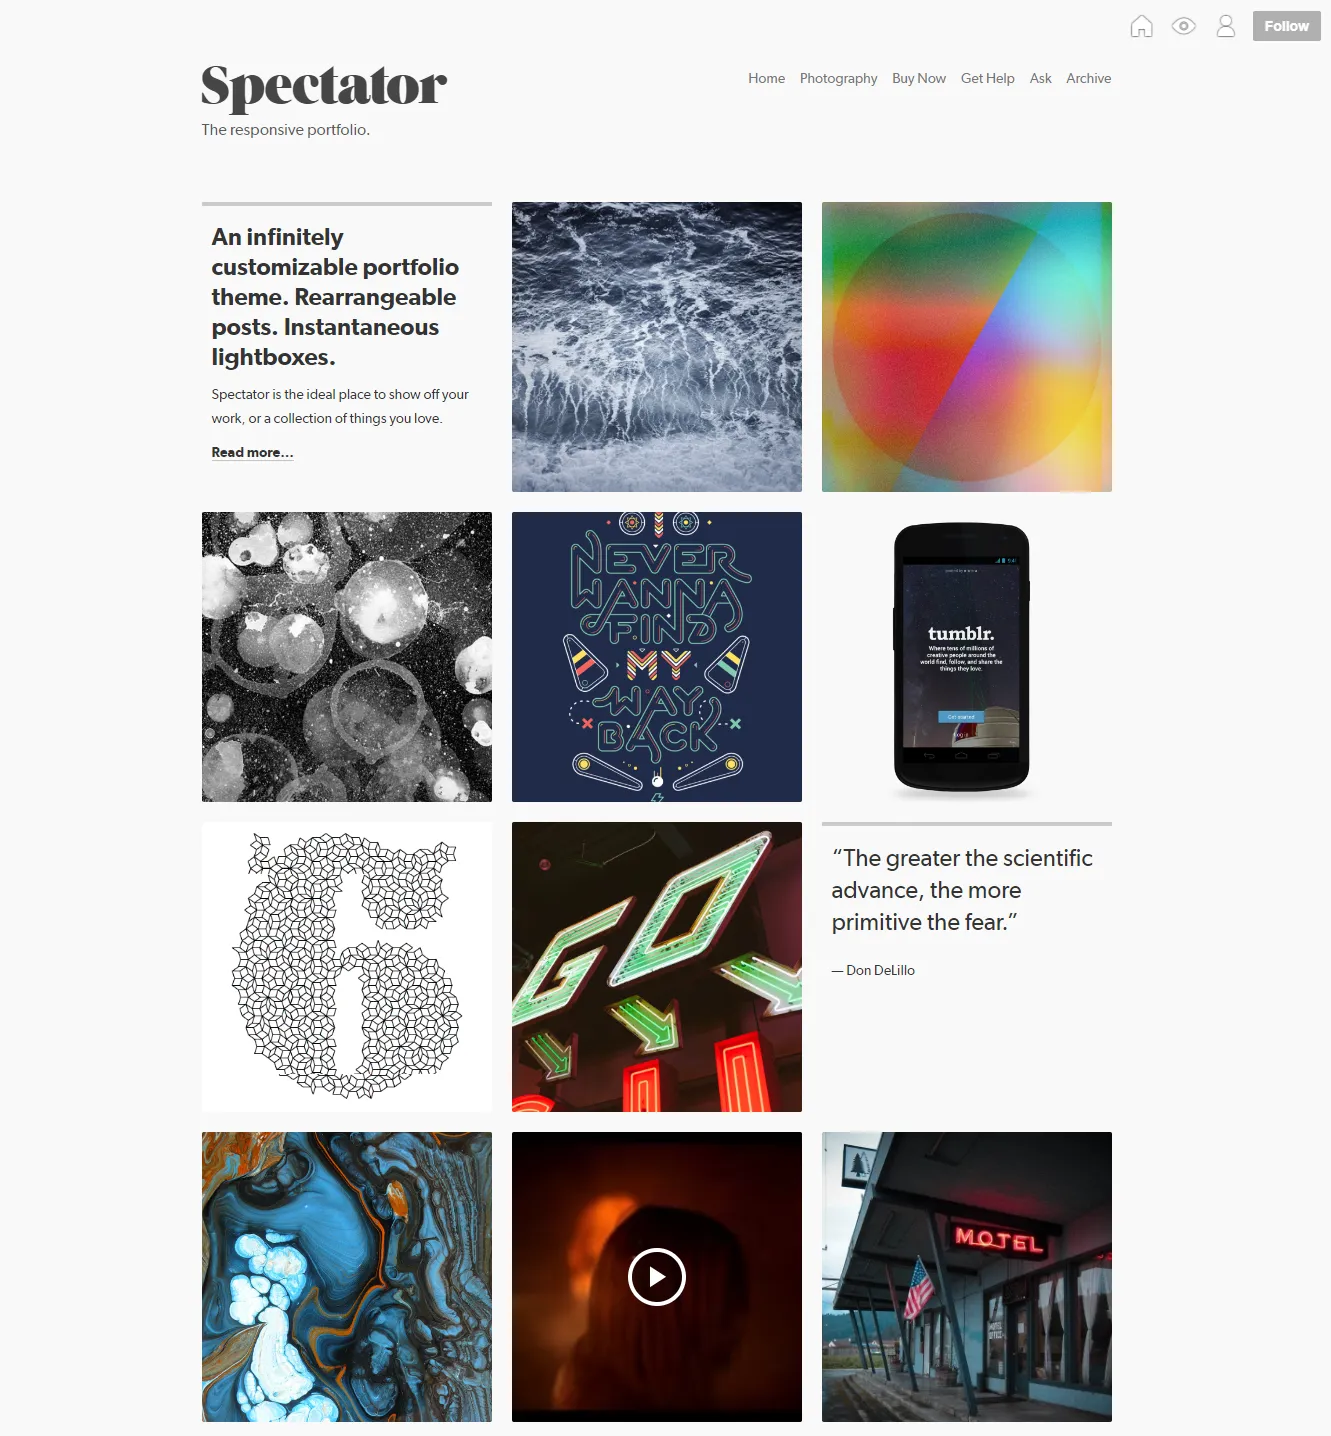 Bestcorp Spectator Tumblr theme perfect for showcasing your work